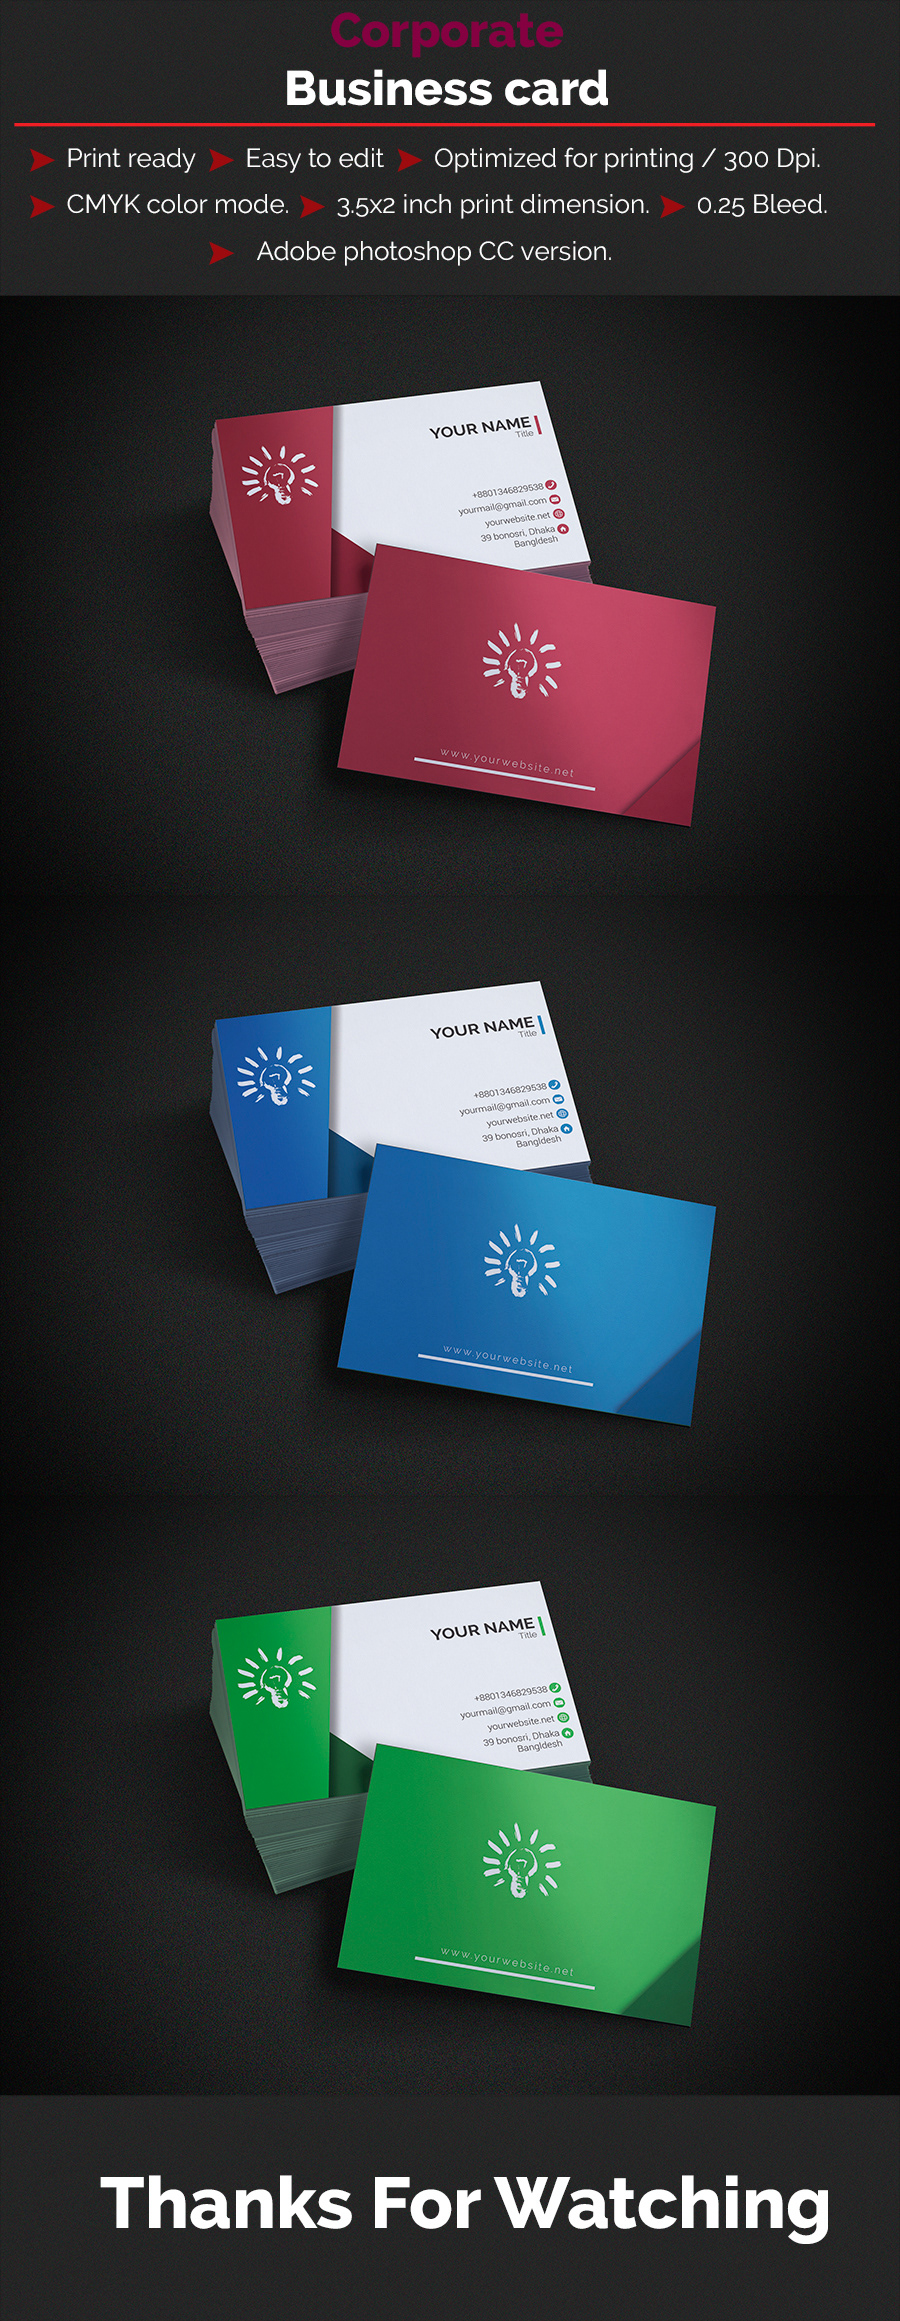 Free Business Card Template on Behance Inside Photoshop Business Card Template With Bleed